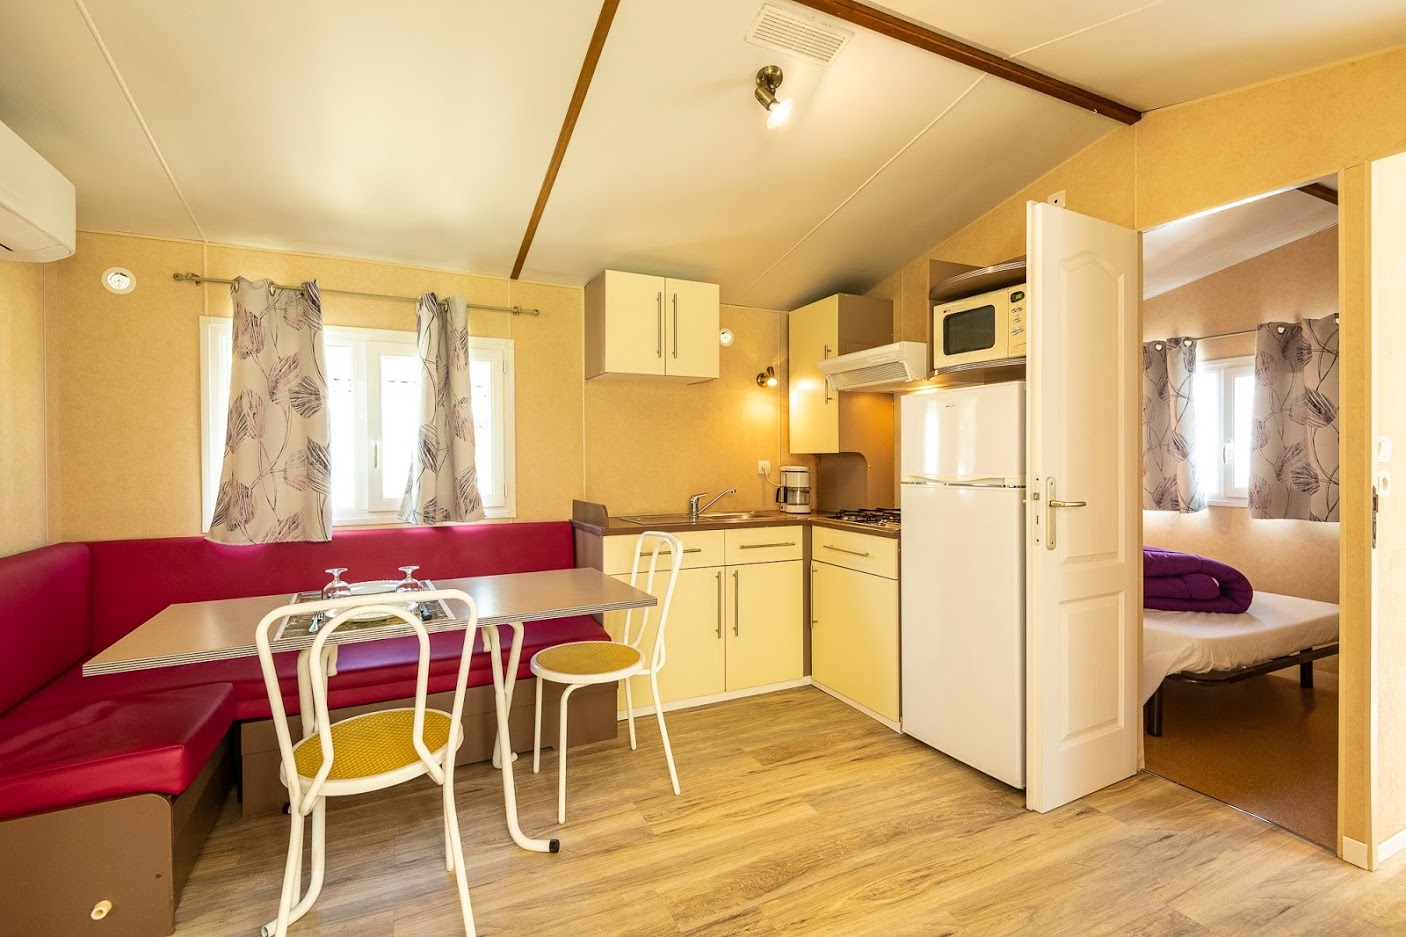 Mobile Home 2 bedrooms